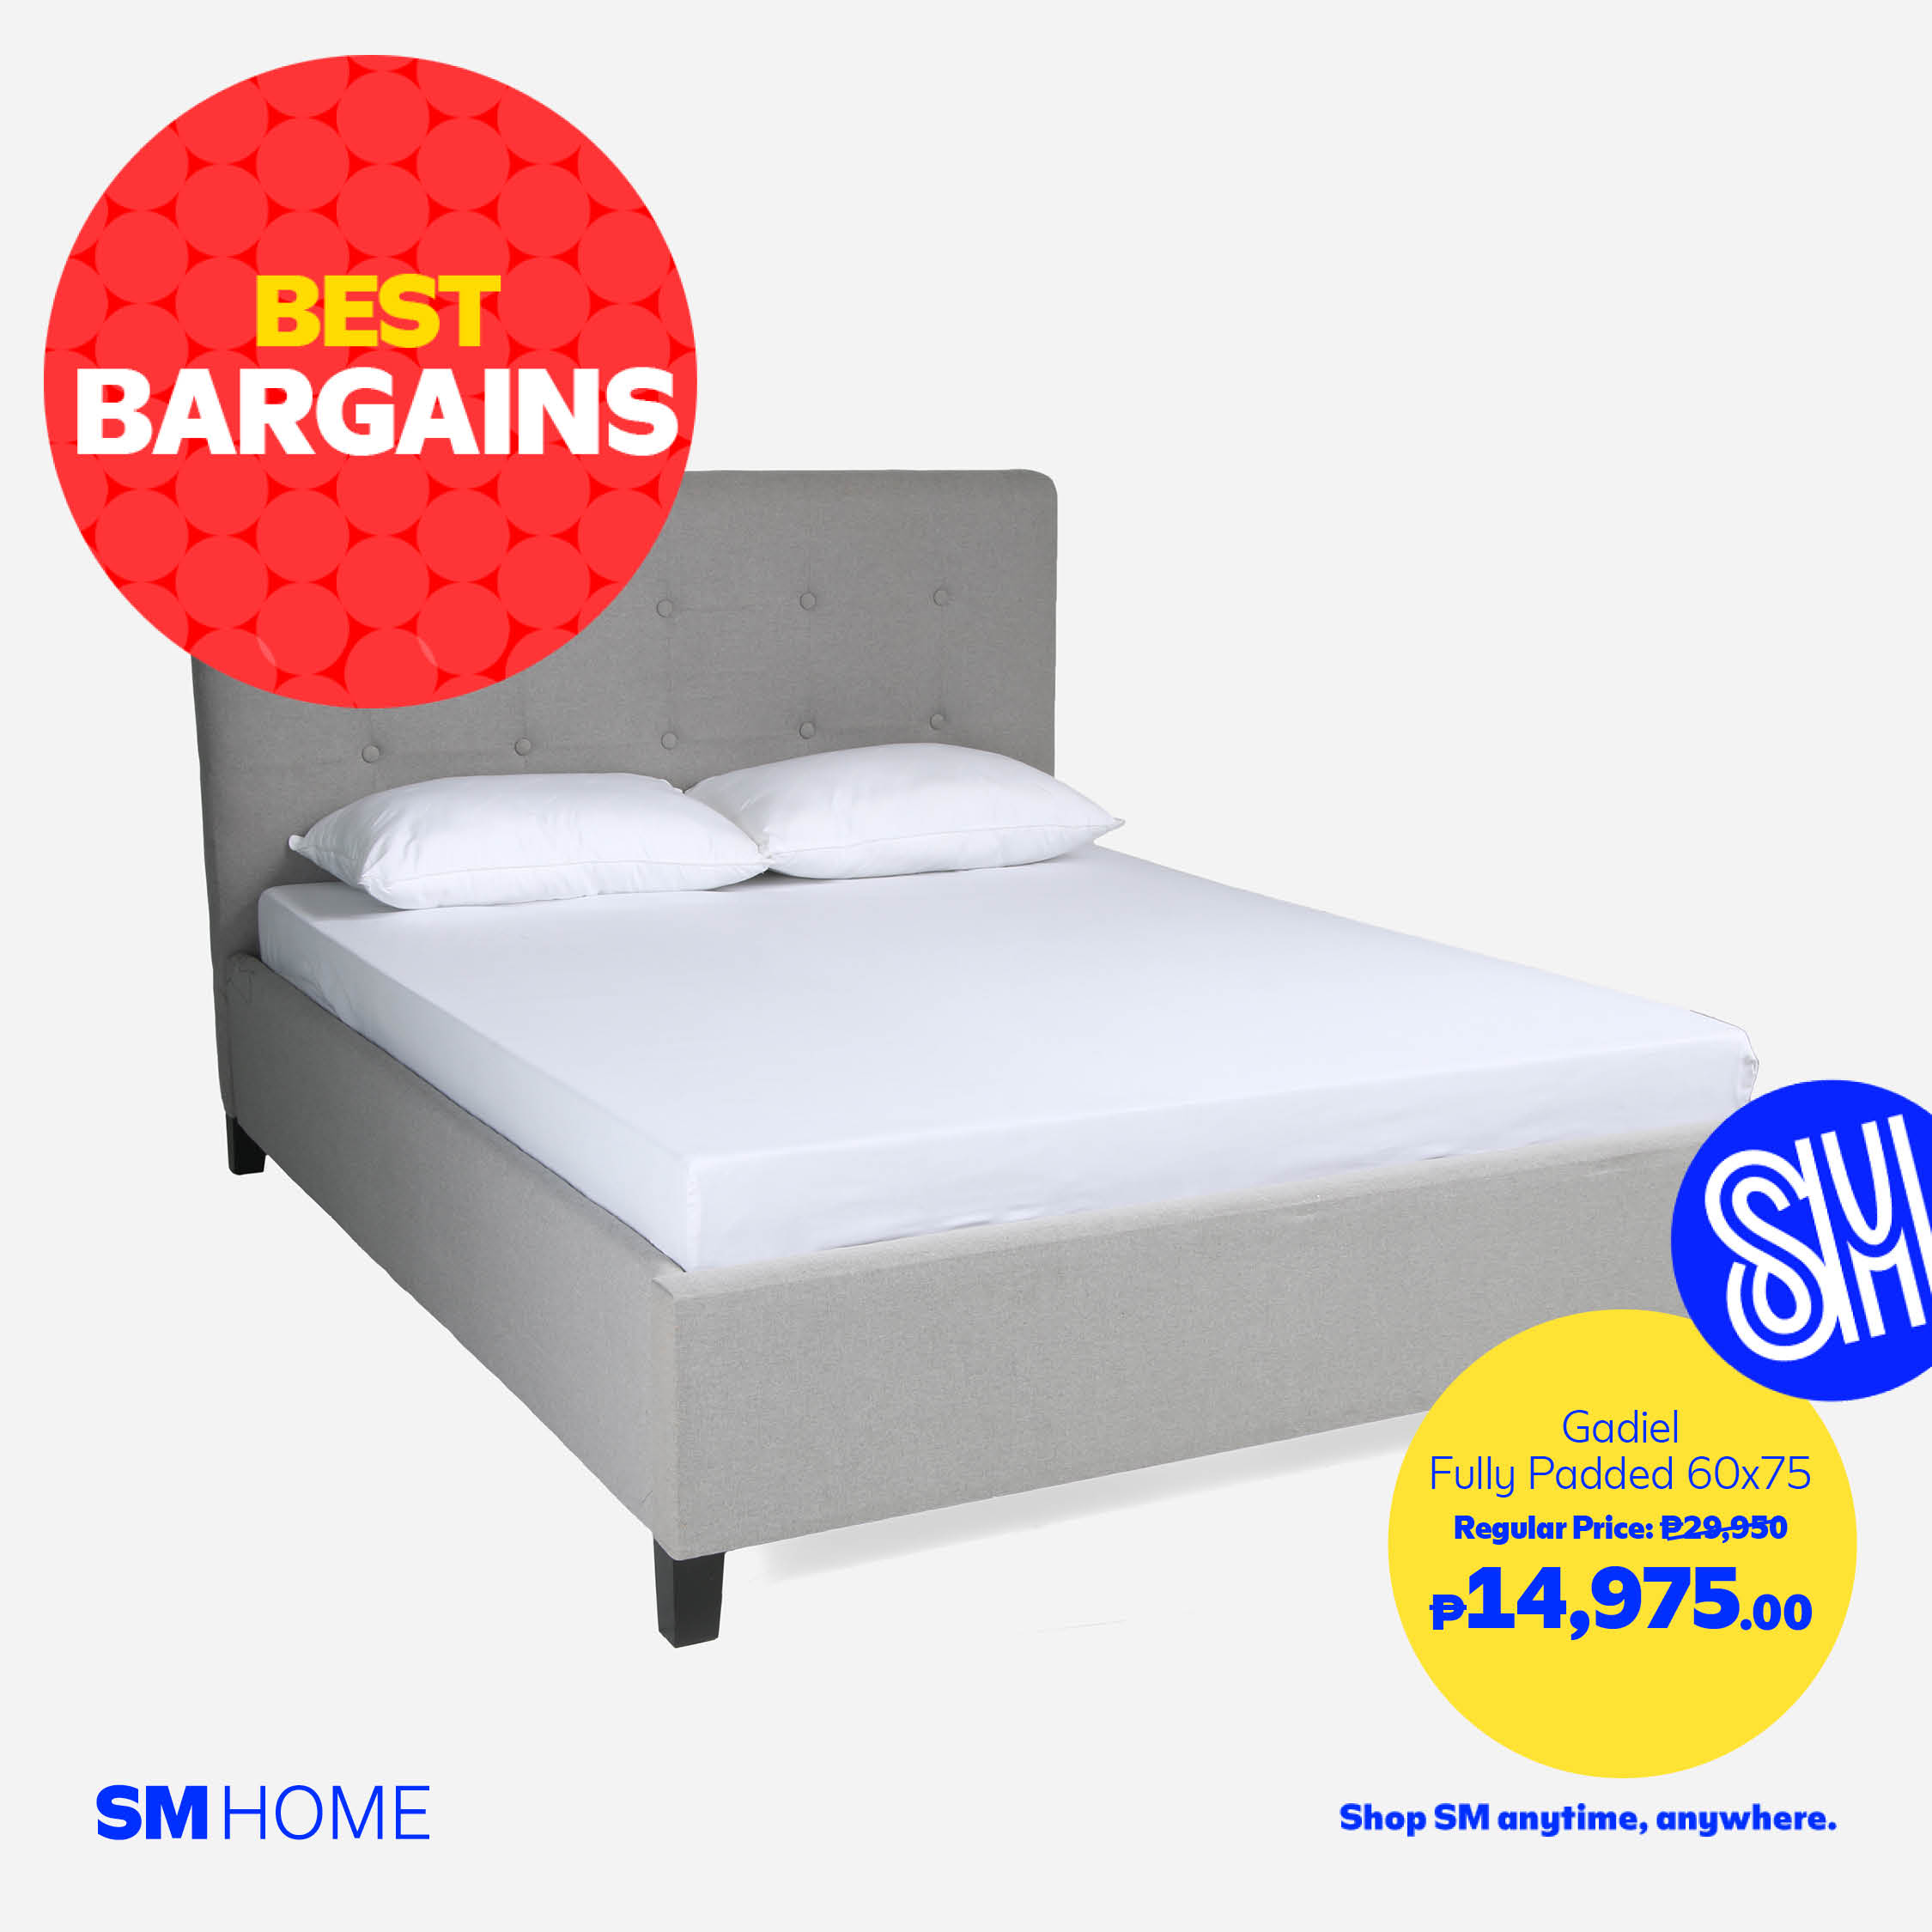 SM Store SM Home Aug Always On_FB_6 Best Bargains